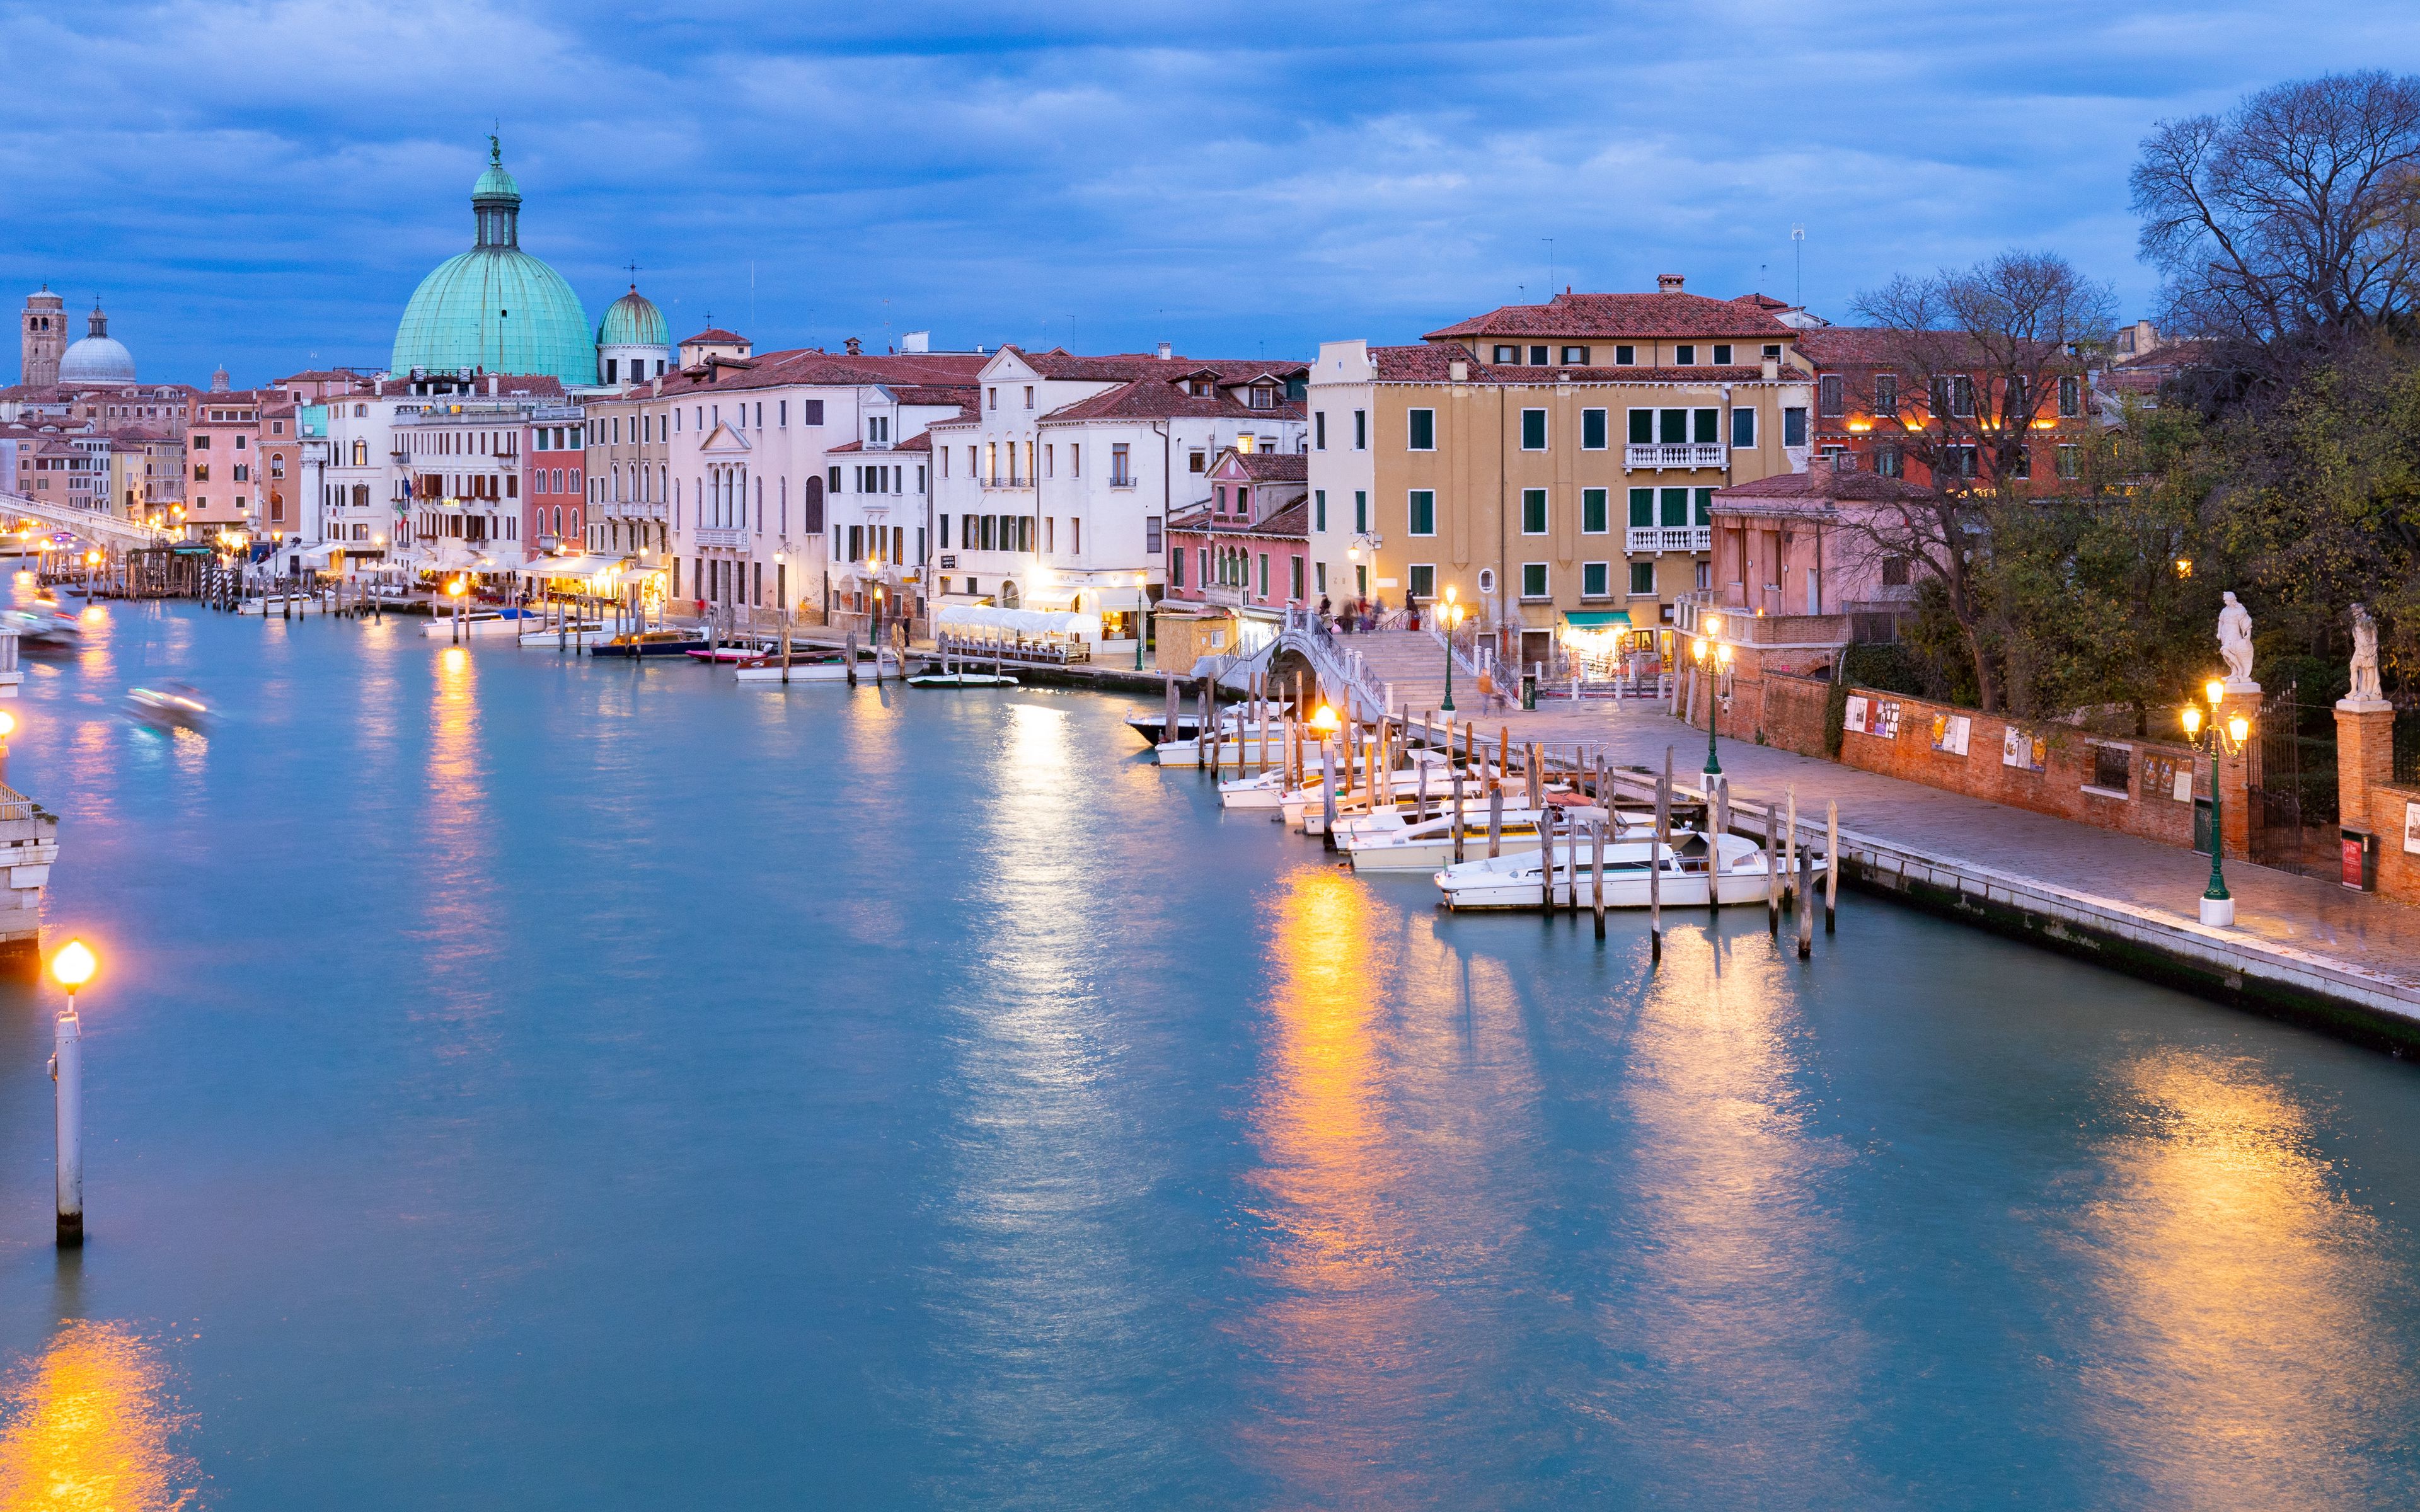 Download wallpaper 3840x2400 grand canal, venice, italy, canal, dome ...